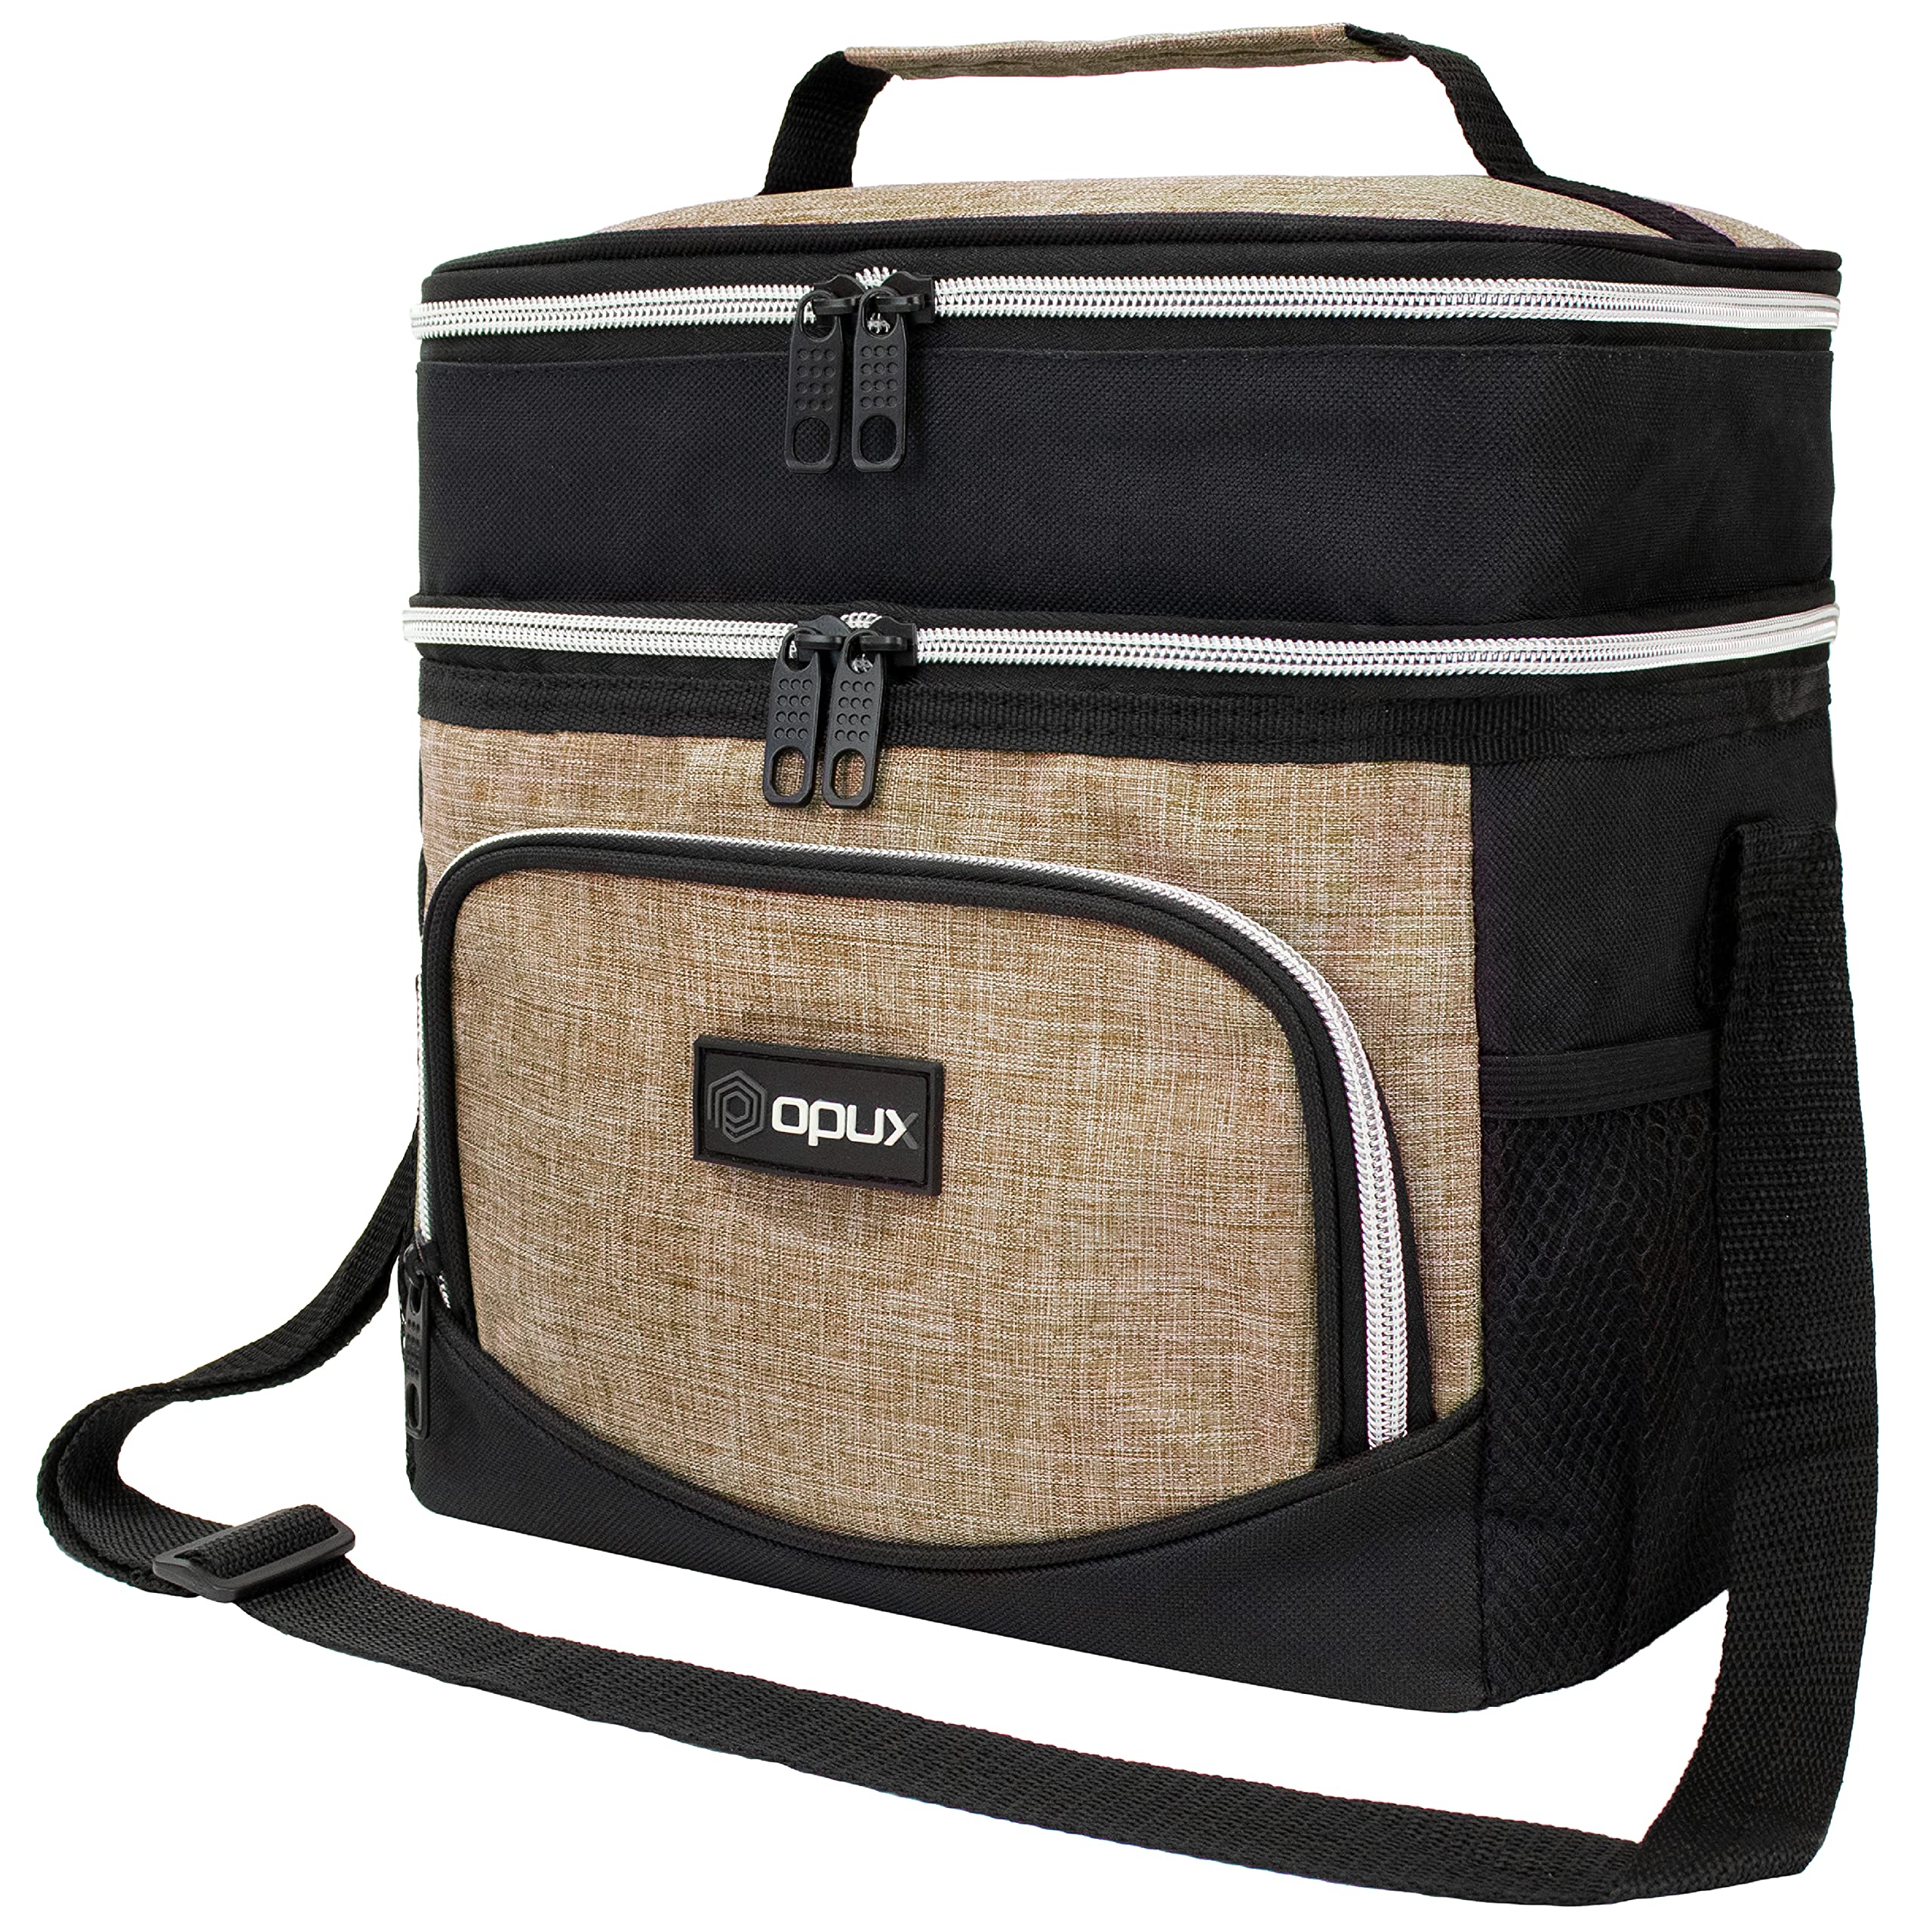 opux Insulated Dual Compartment Lunch Box Men Women | Leakproof Double Deck Lunch Bag Work Office | Soft Cooler Tote Strap Adult | Reusable Thermal Lunch Pail 12 Cans, Brown Tan Taupe Beige